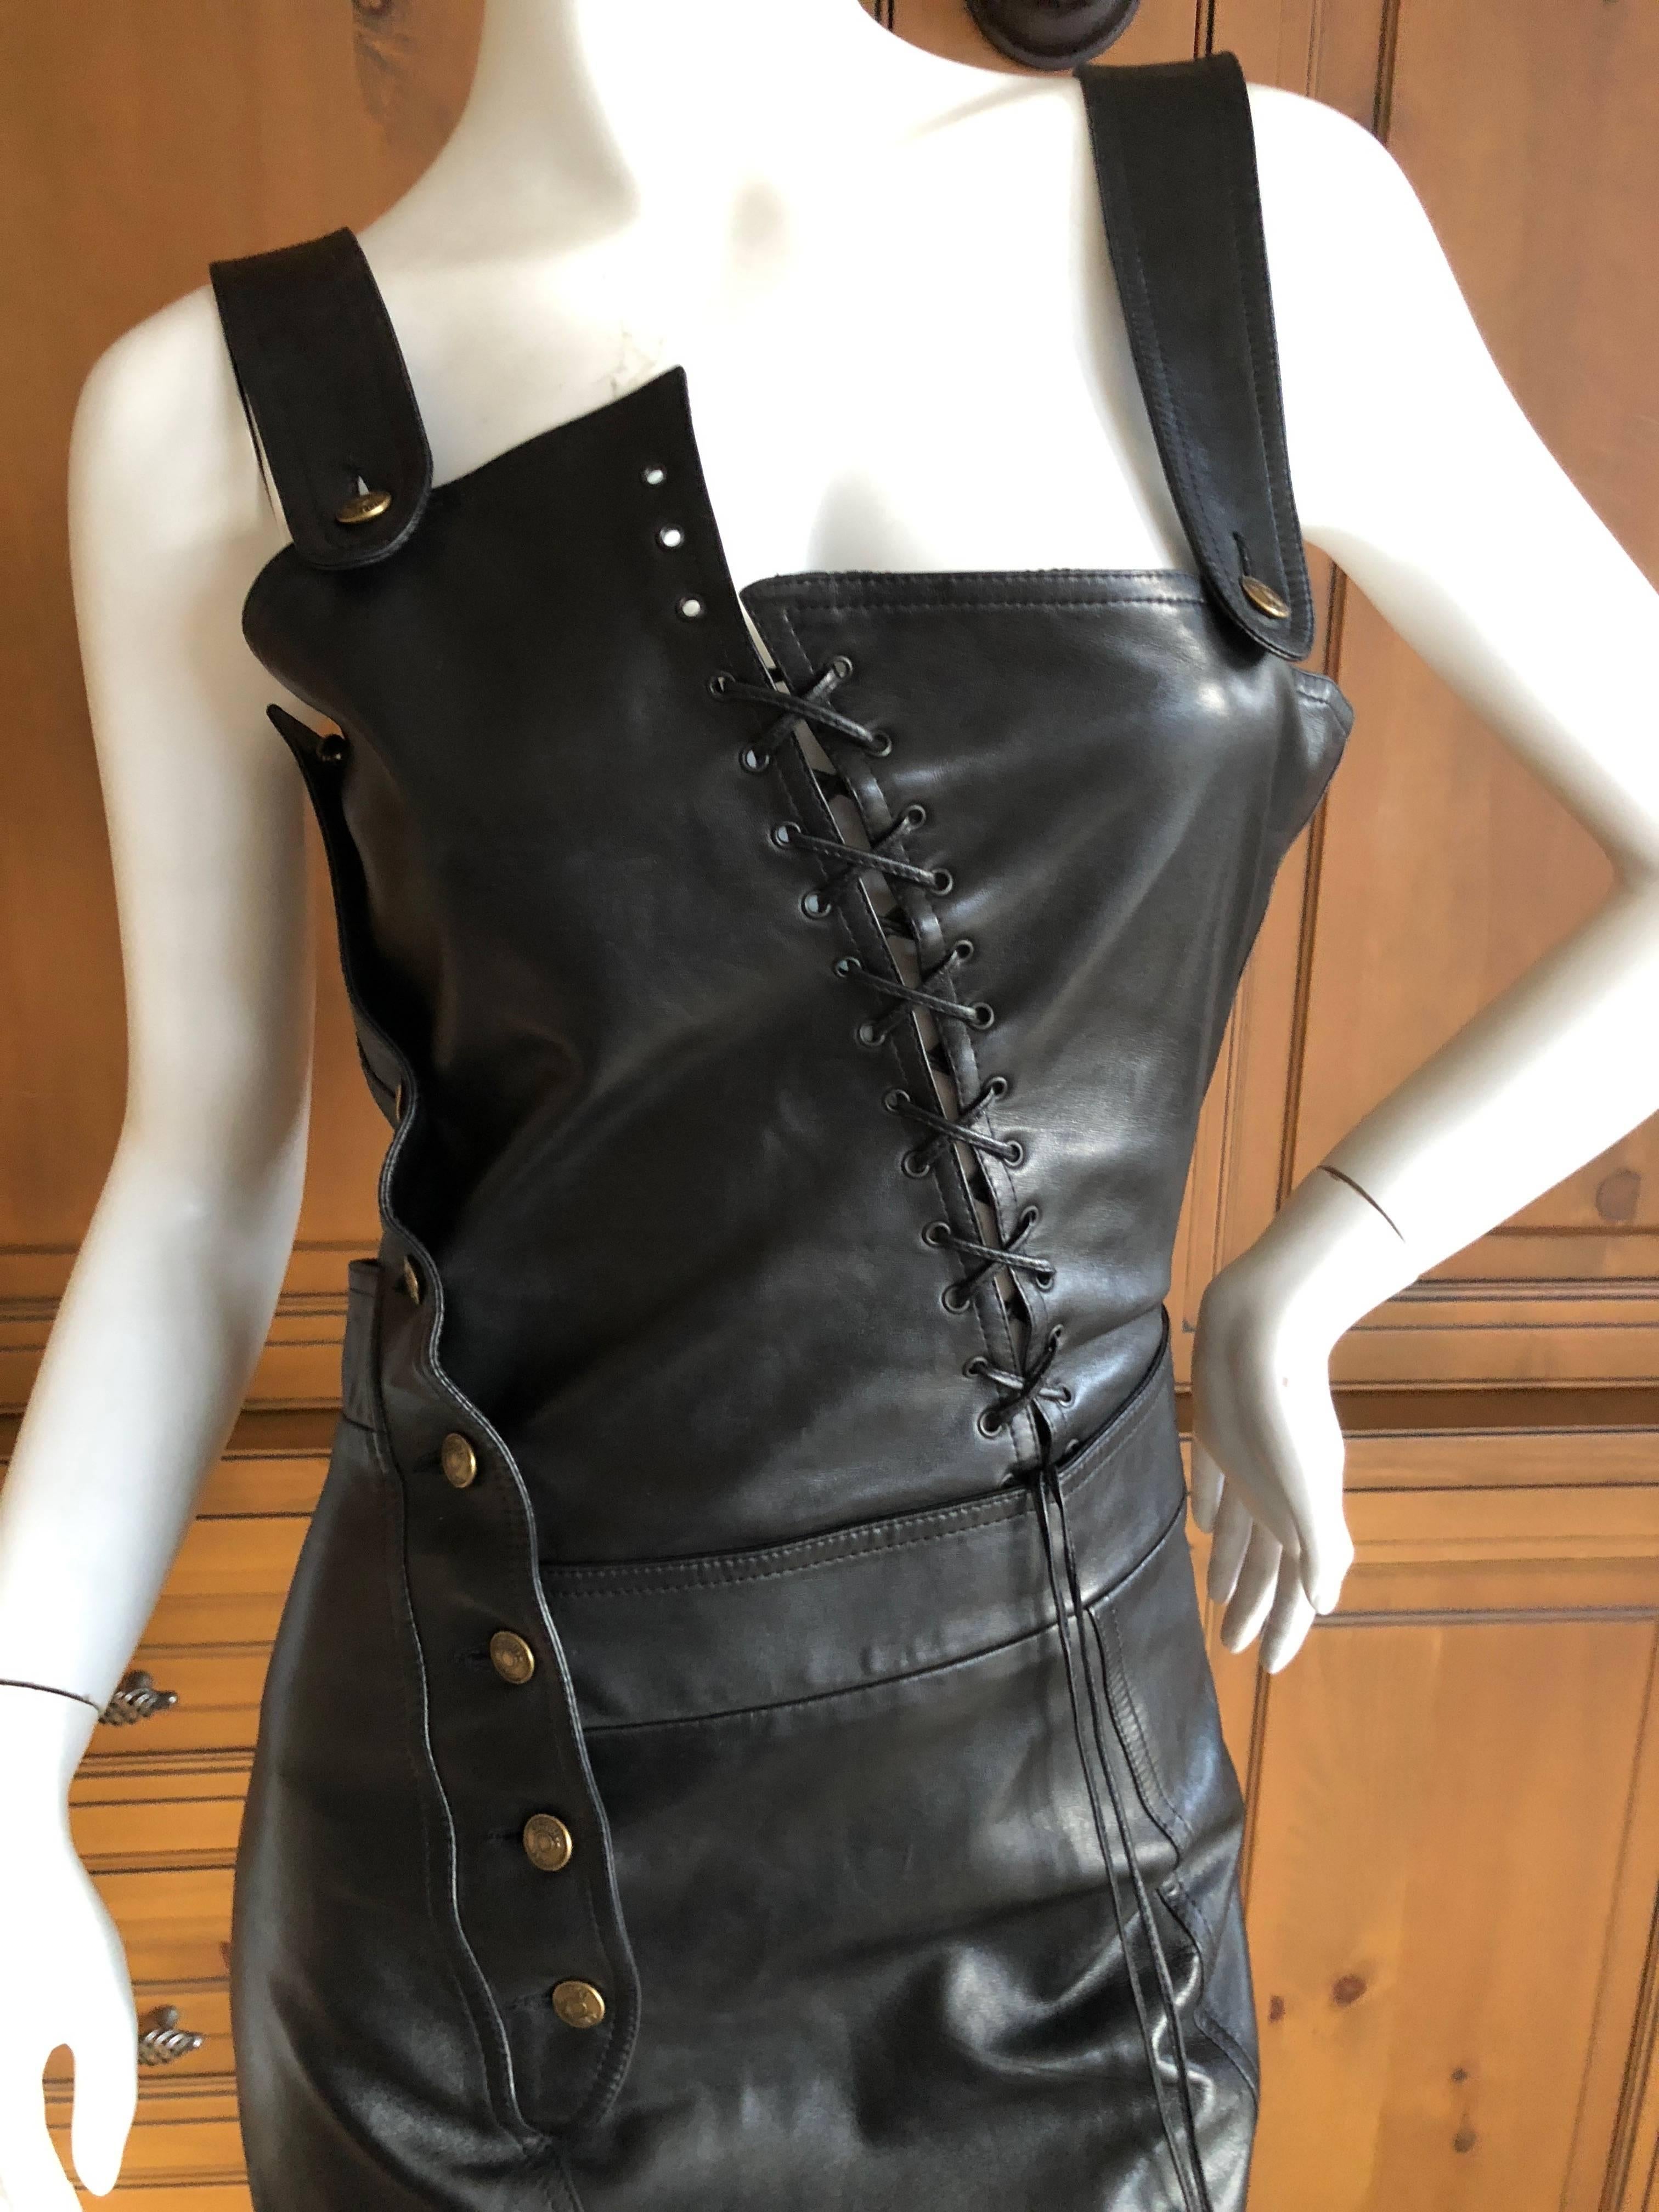 Christian Dior John Galliano Goth Black Asymmetrical Leather Dress Spring 2000 In Excellent Condition For Sale In Cloverdale, CA